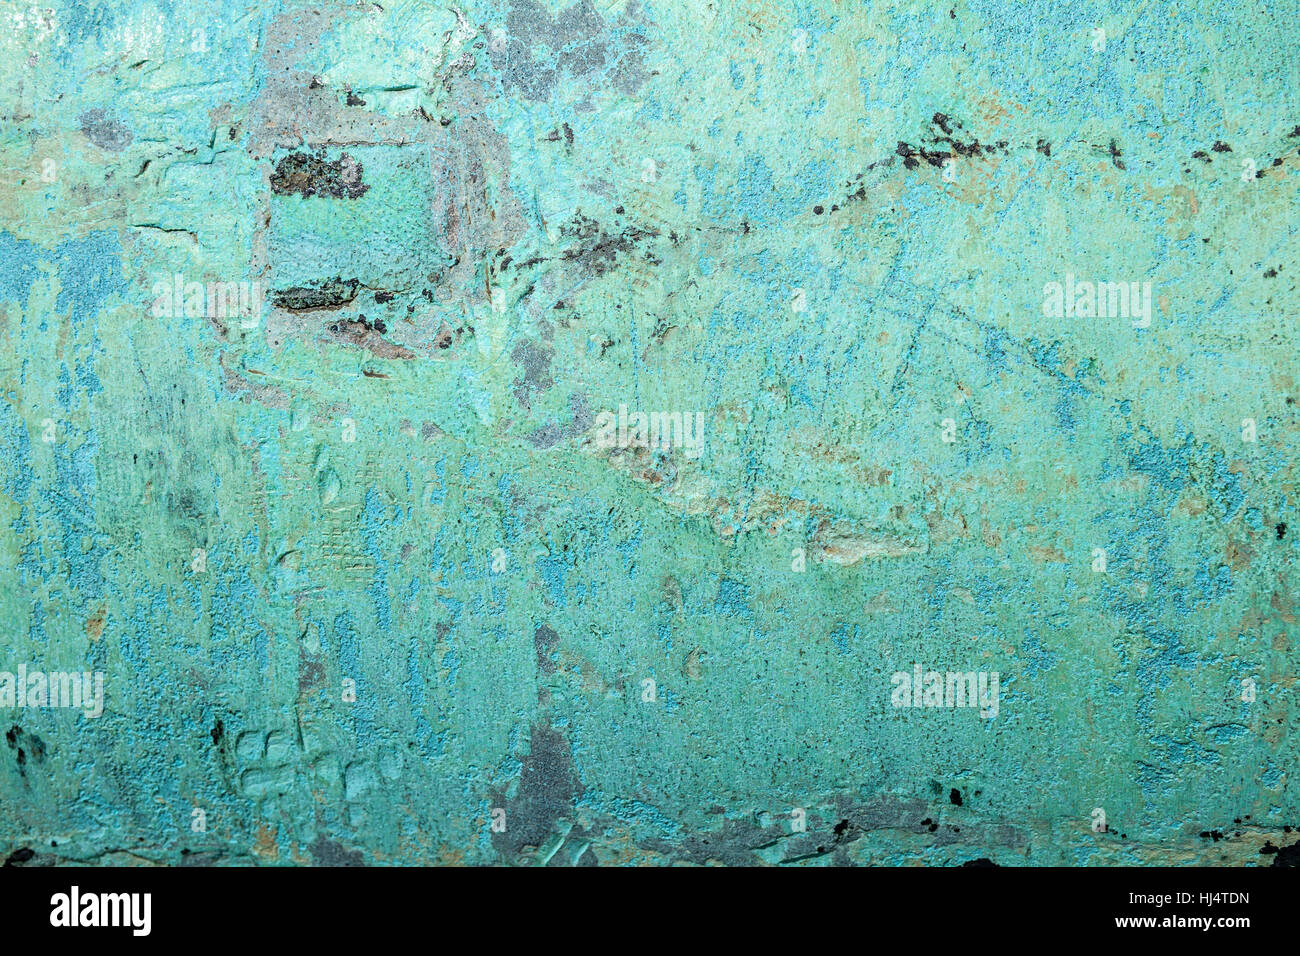 Background image of scratched antique copper vessel surface texture Stock Photo